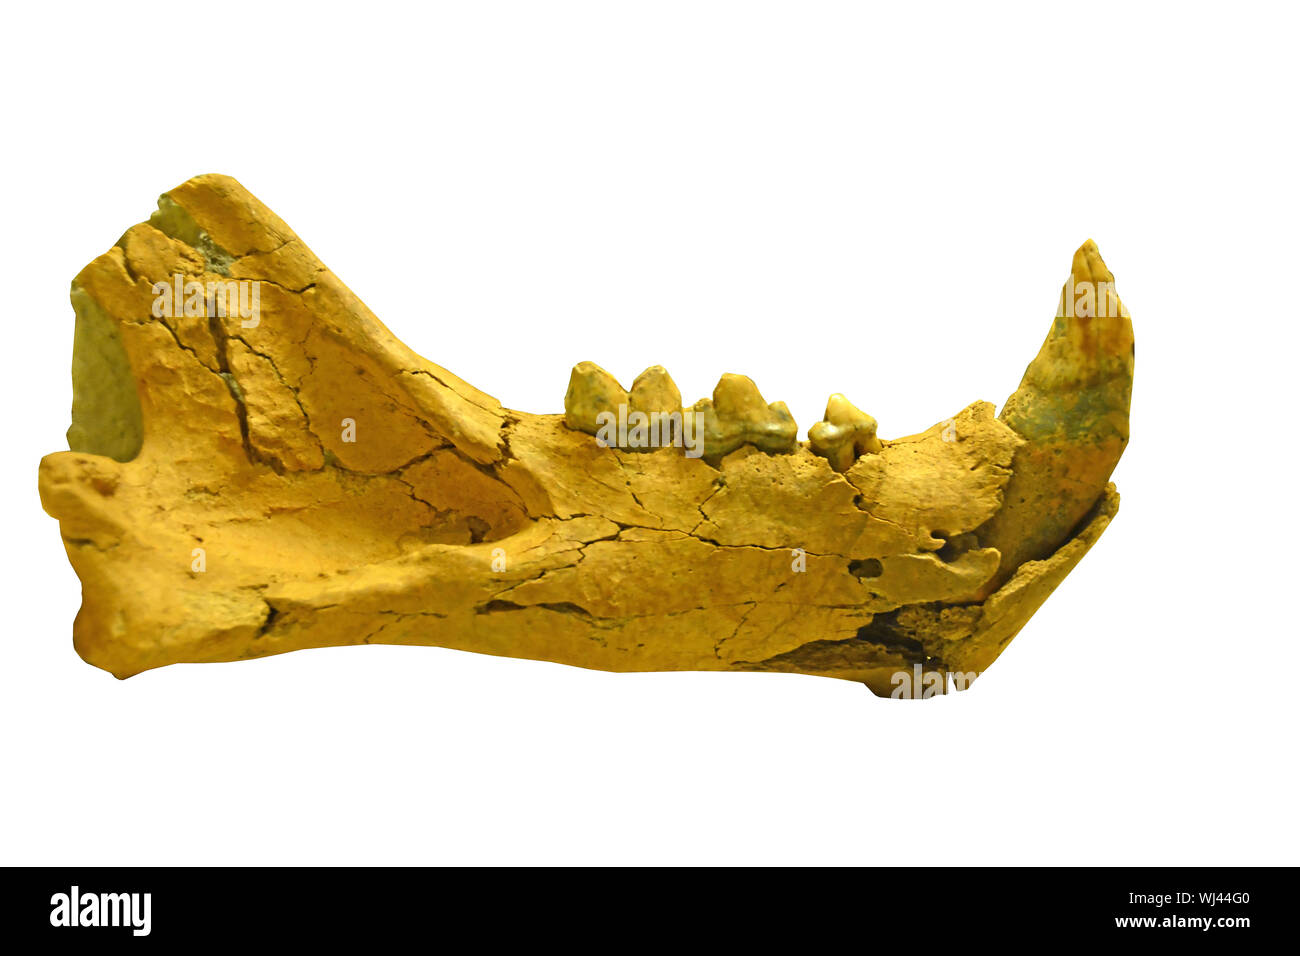 A cave lion (panthera spelea) lower jaw (mandible) from the last Ice Age with immense canine teeth and molars intact. Isolated against a white backgro Stock Photo